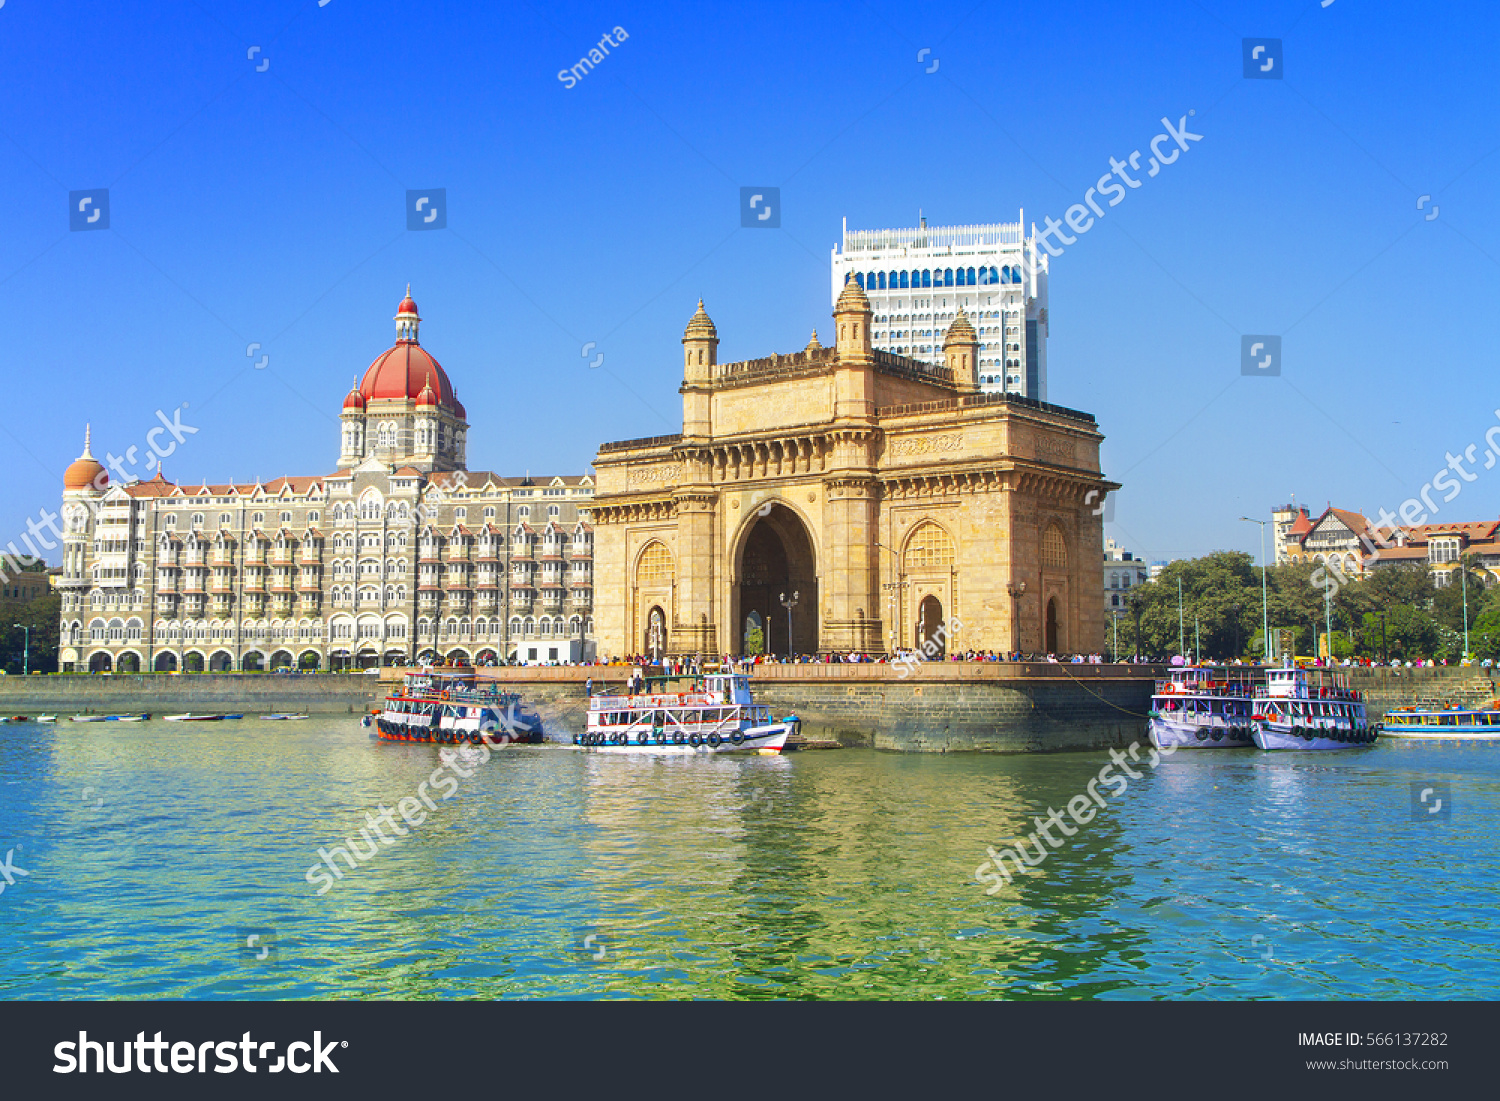 The Gateway of India and boats as seen from the Mumbai Harbour in Mumbai, India #566137282